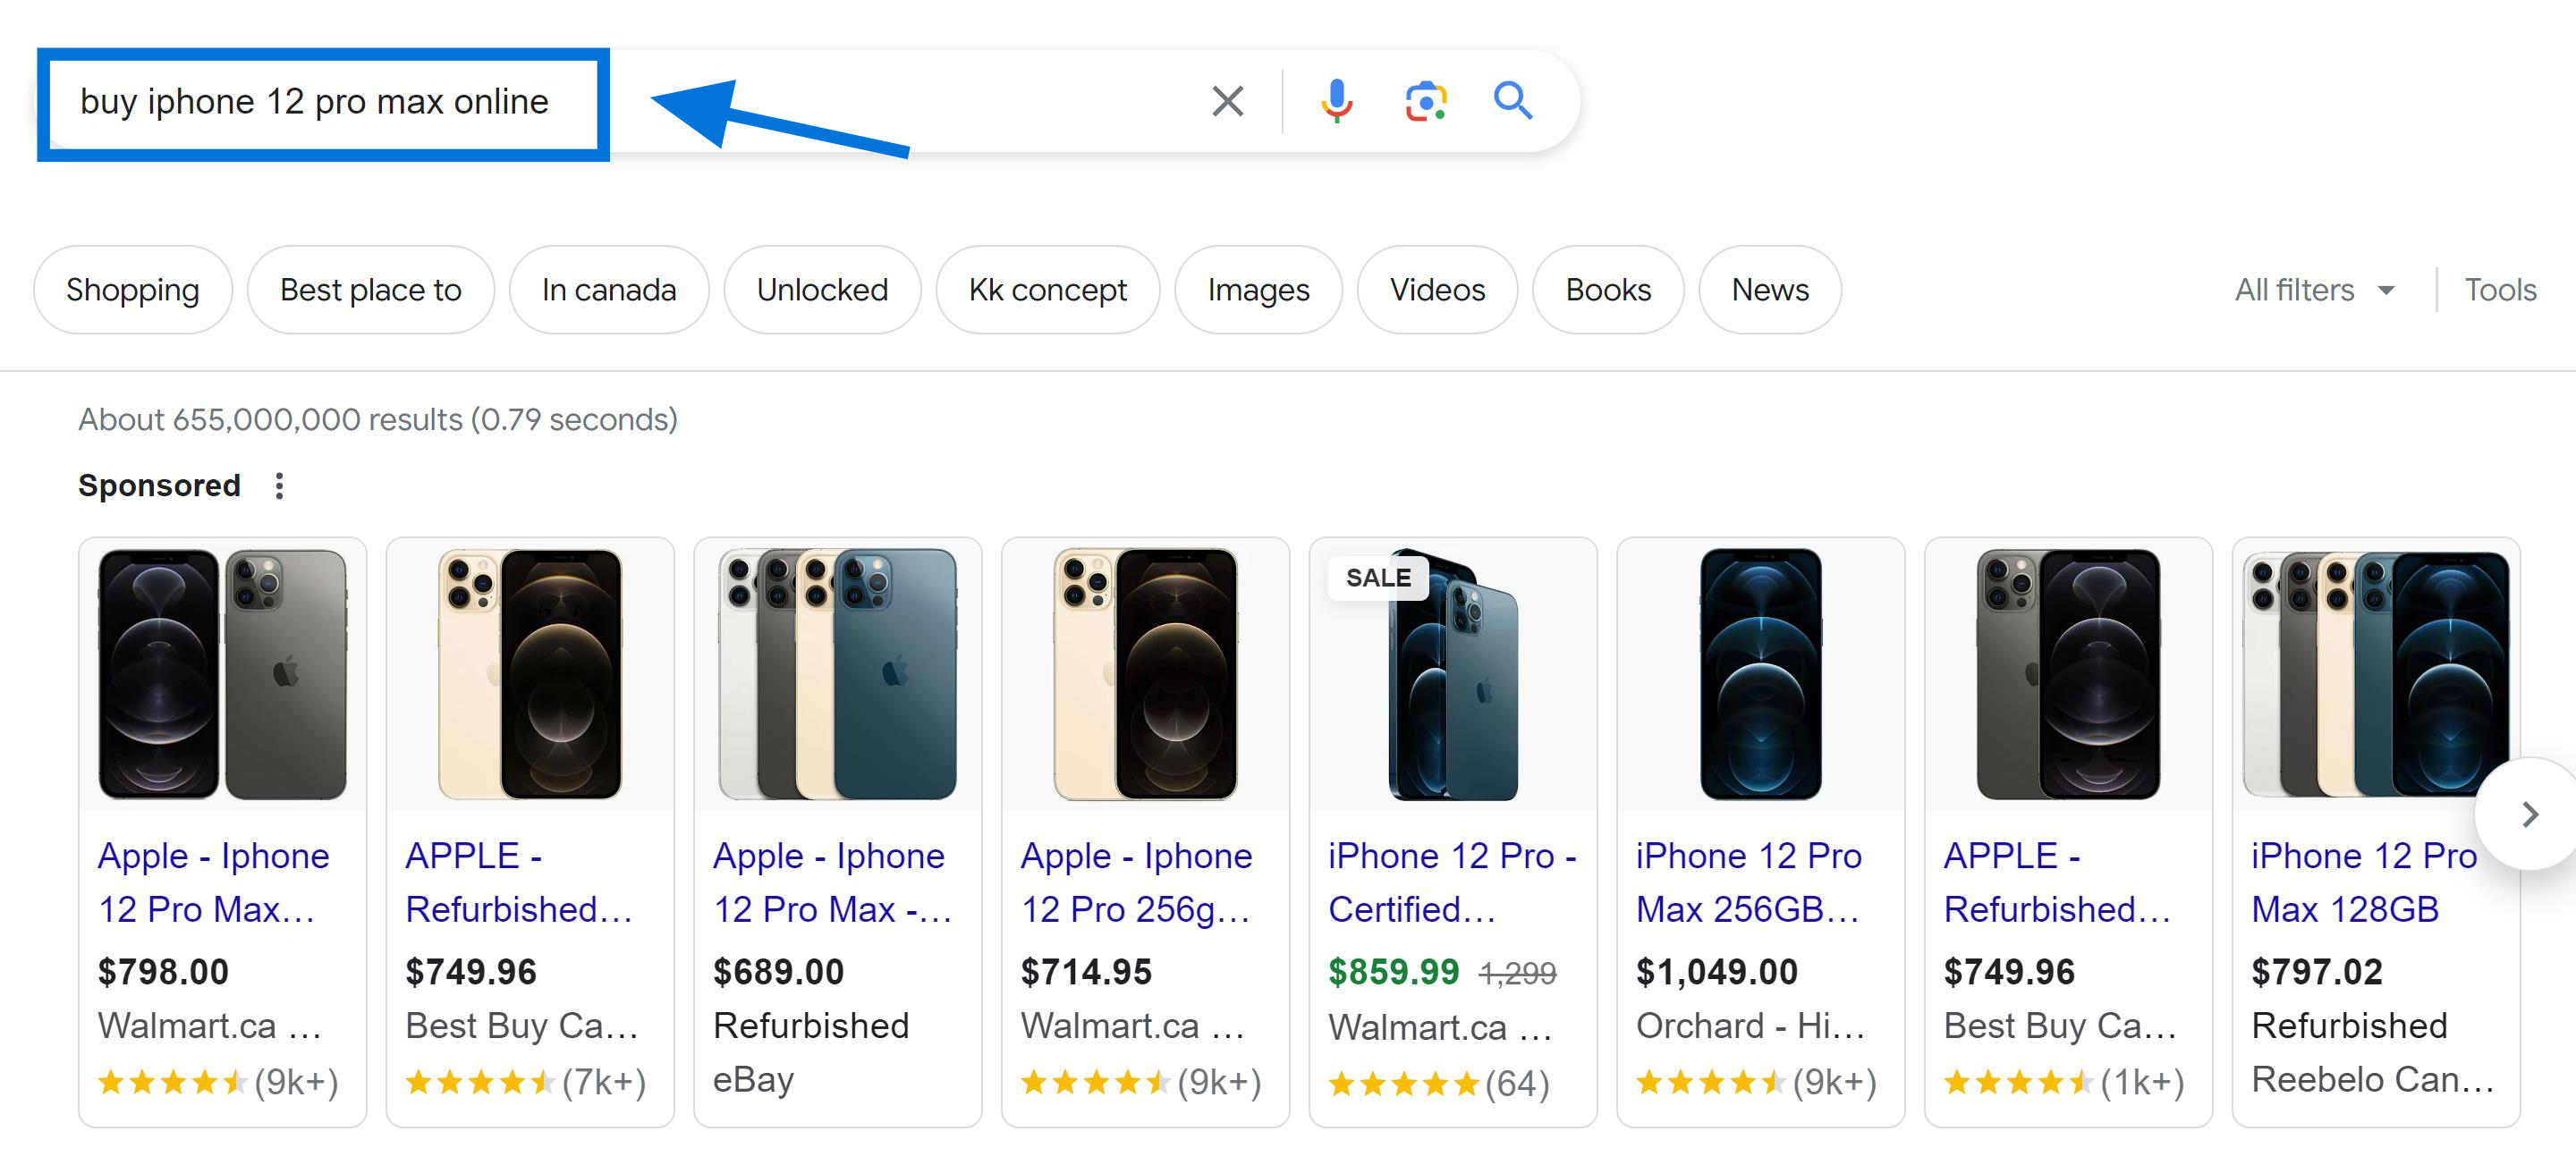 Transactional Keywords Example "buy iphone 12 pro max online"